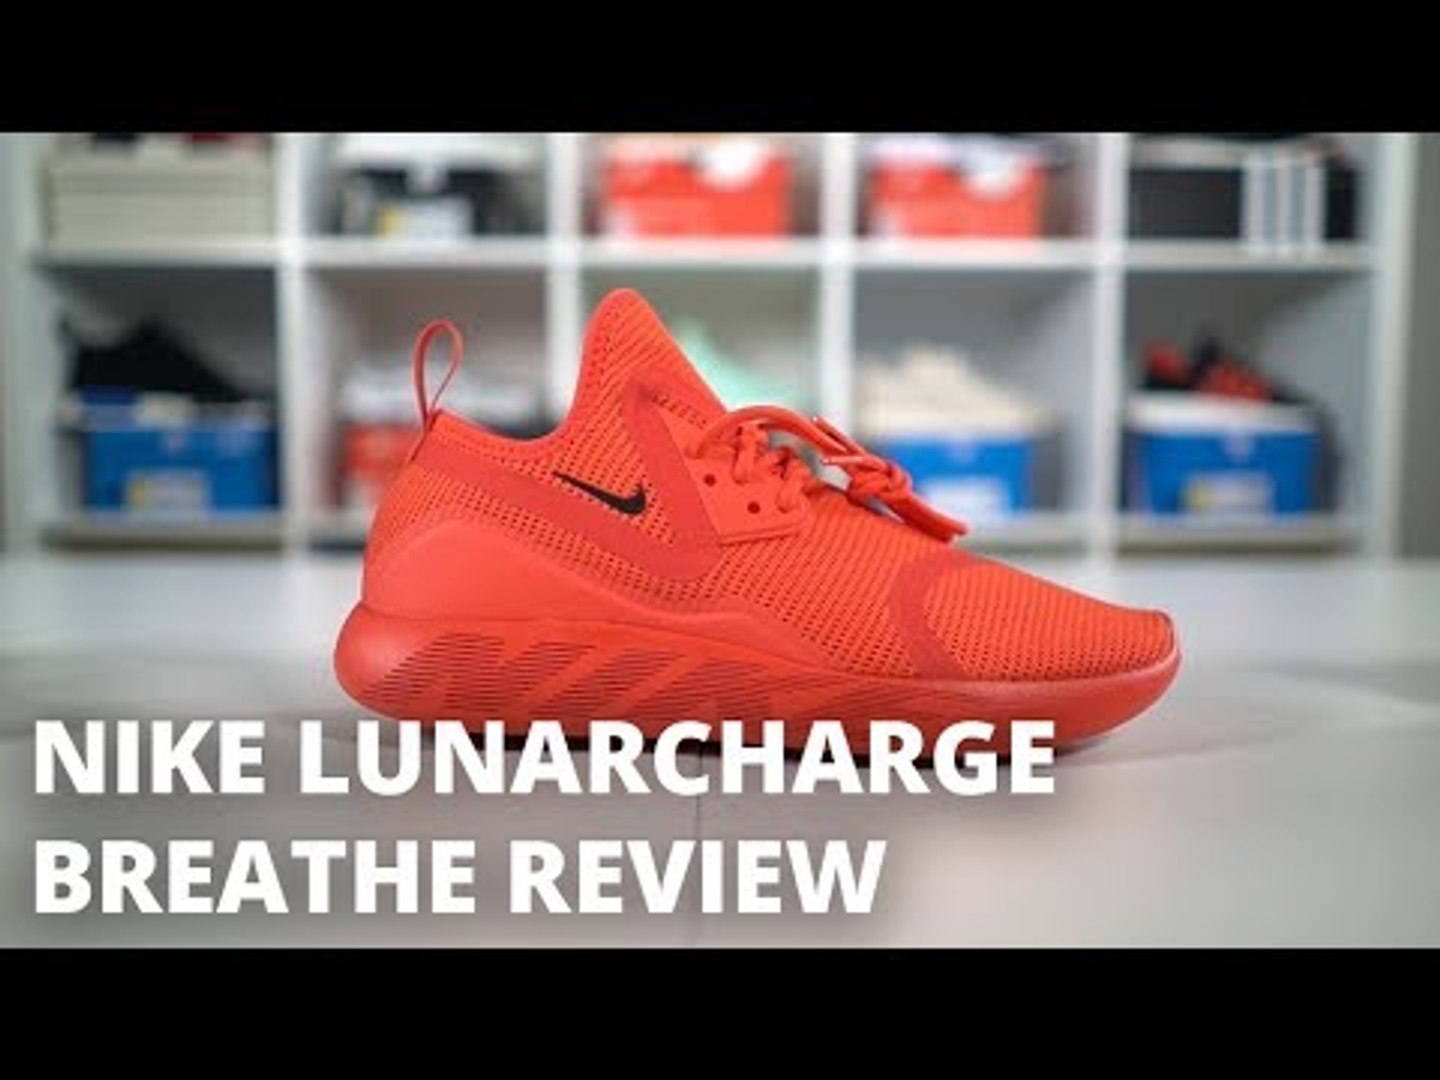 LunarCharge Breathe Review - video Dailymotion